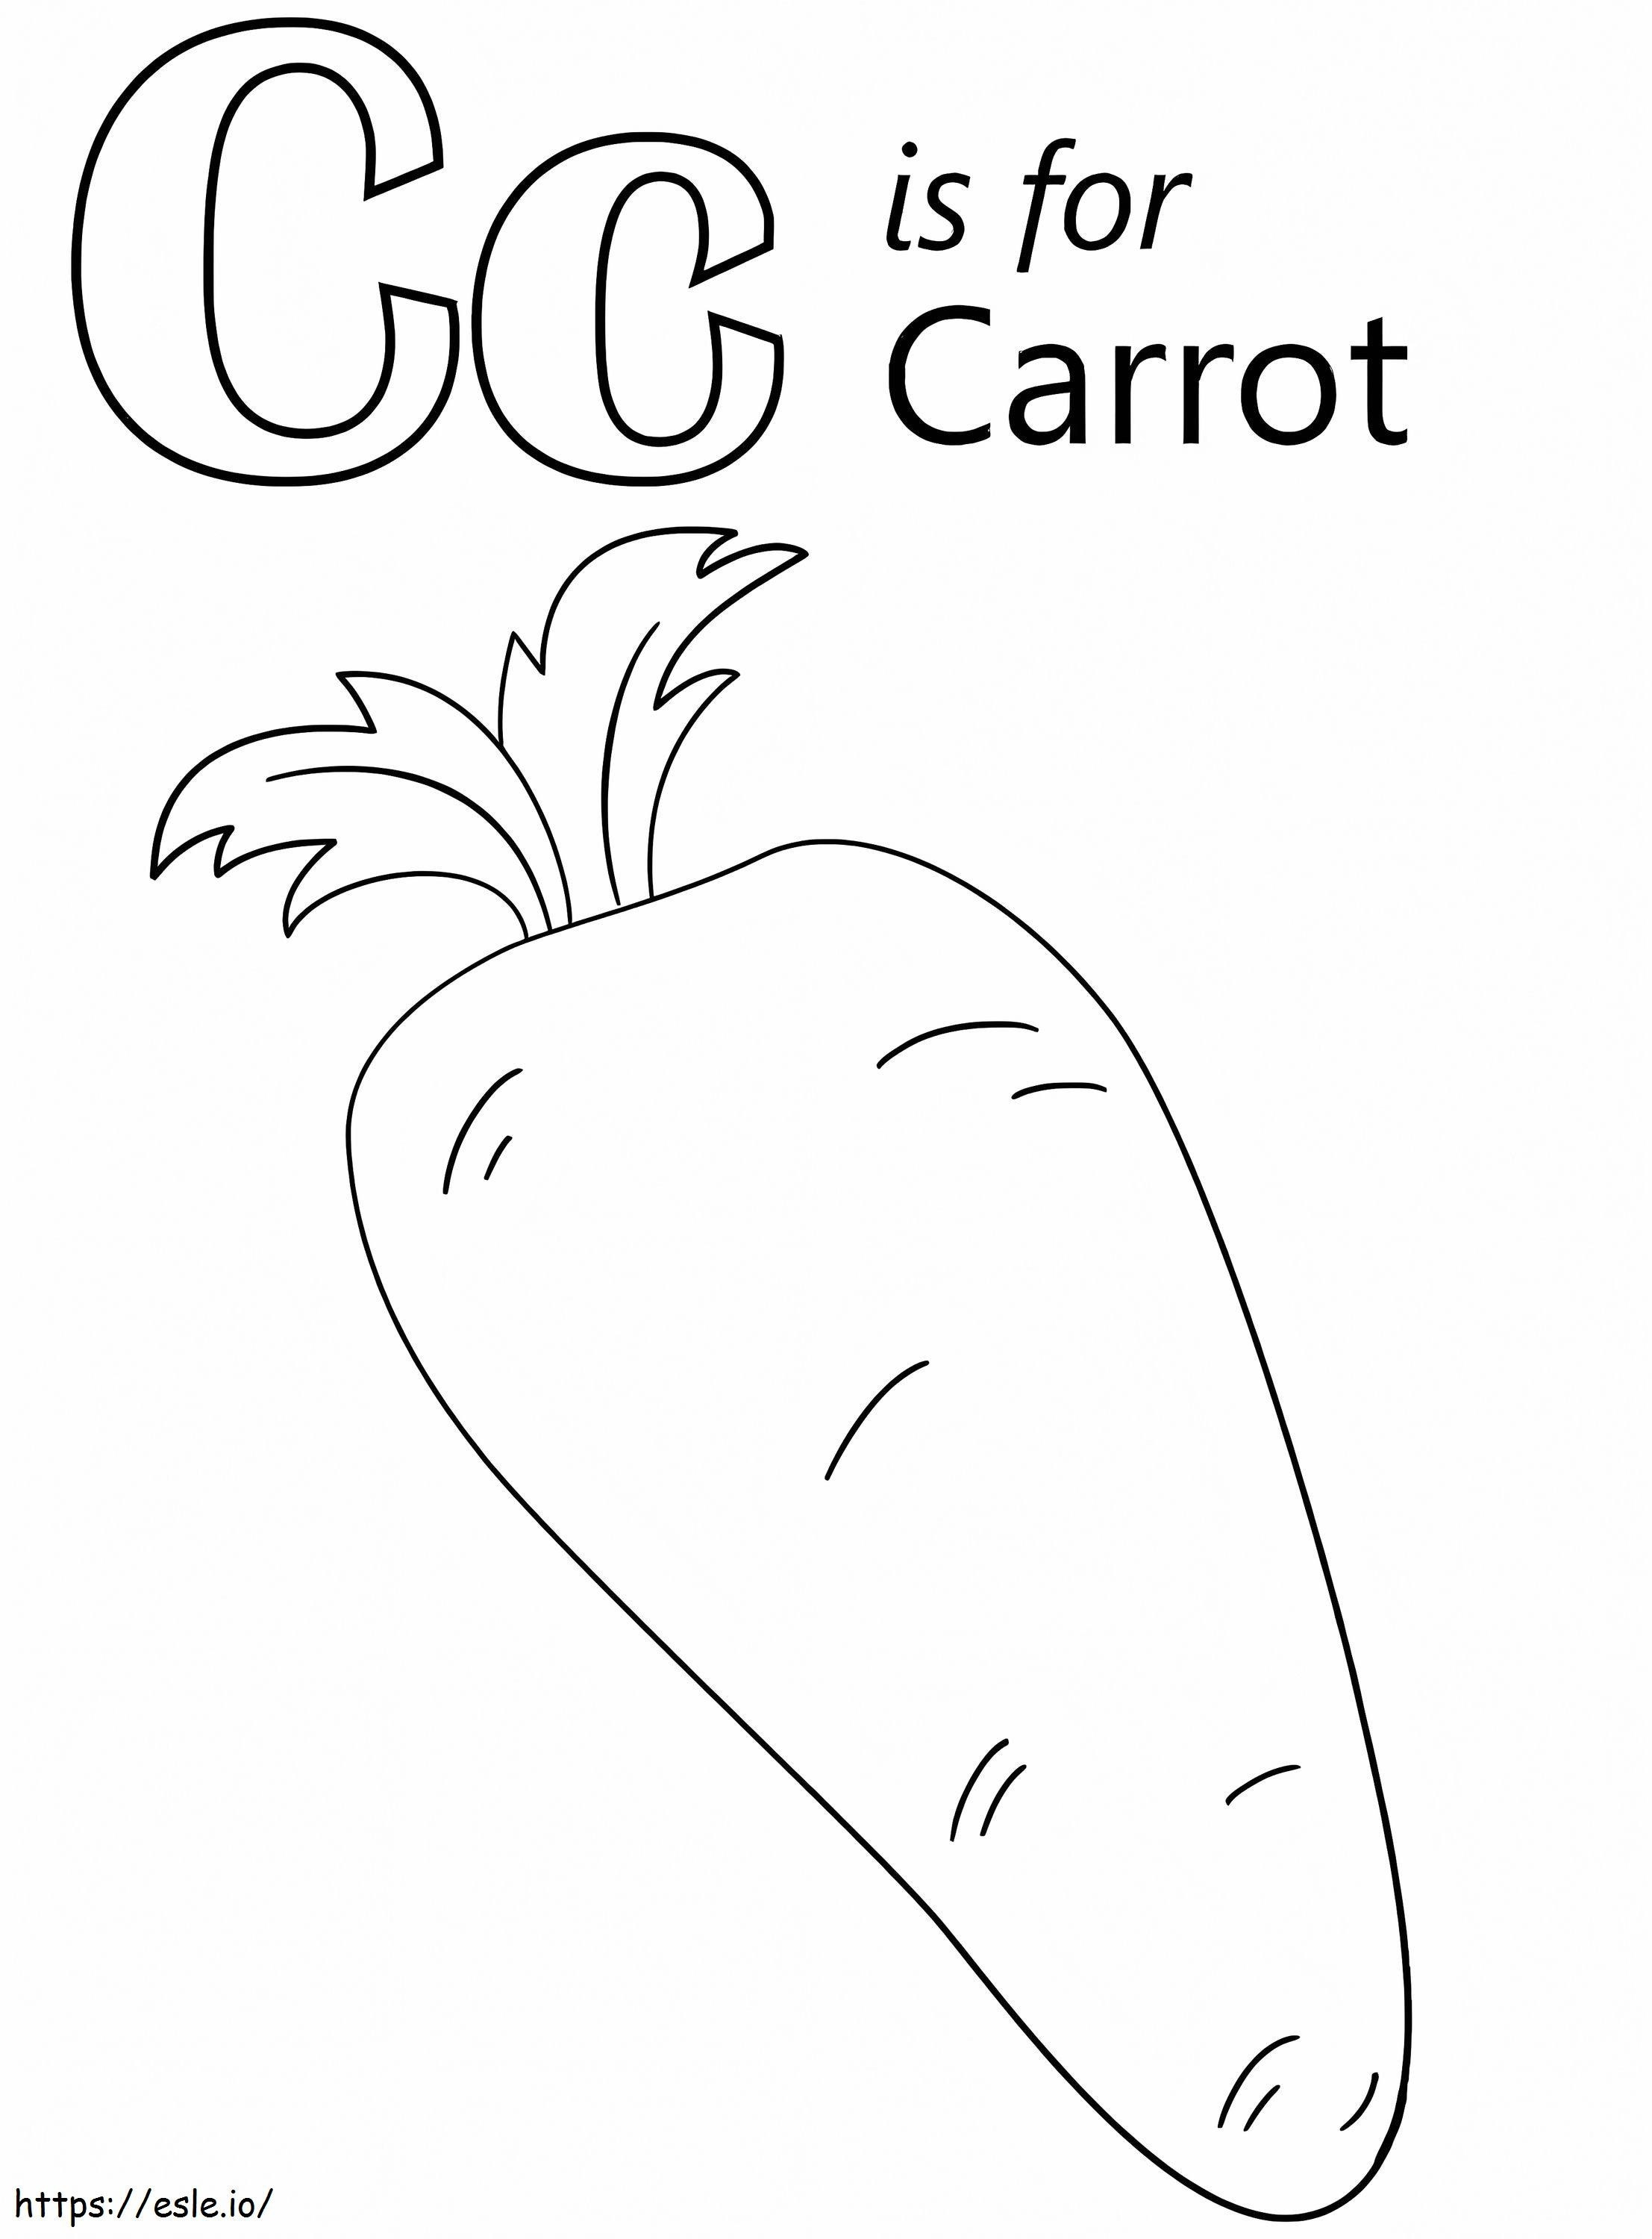 Carrot Letter C coloring page